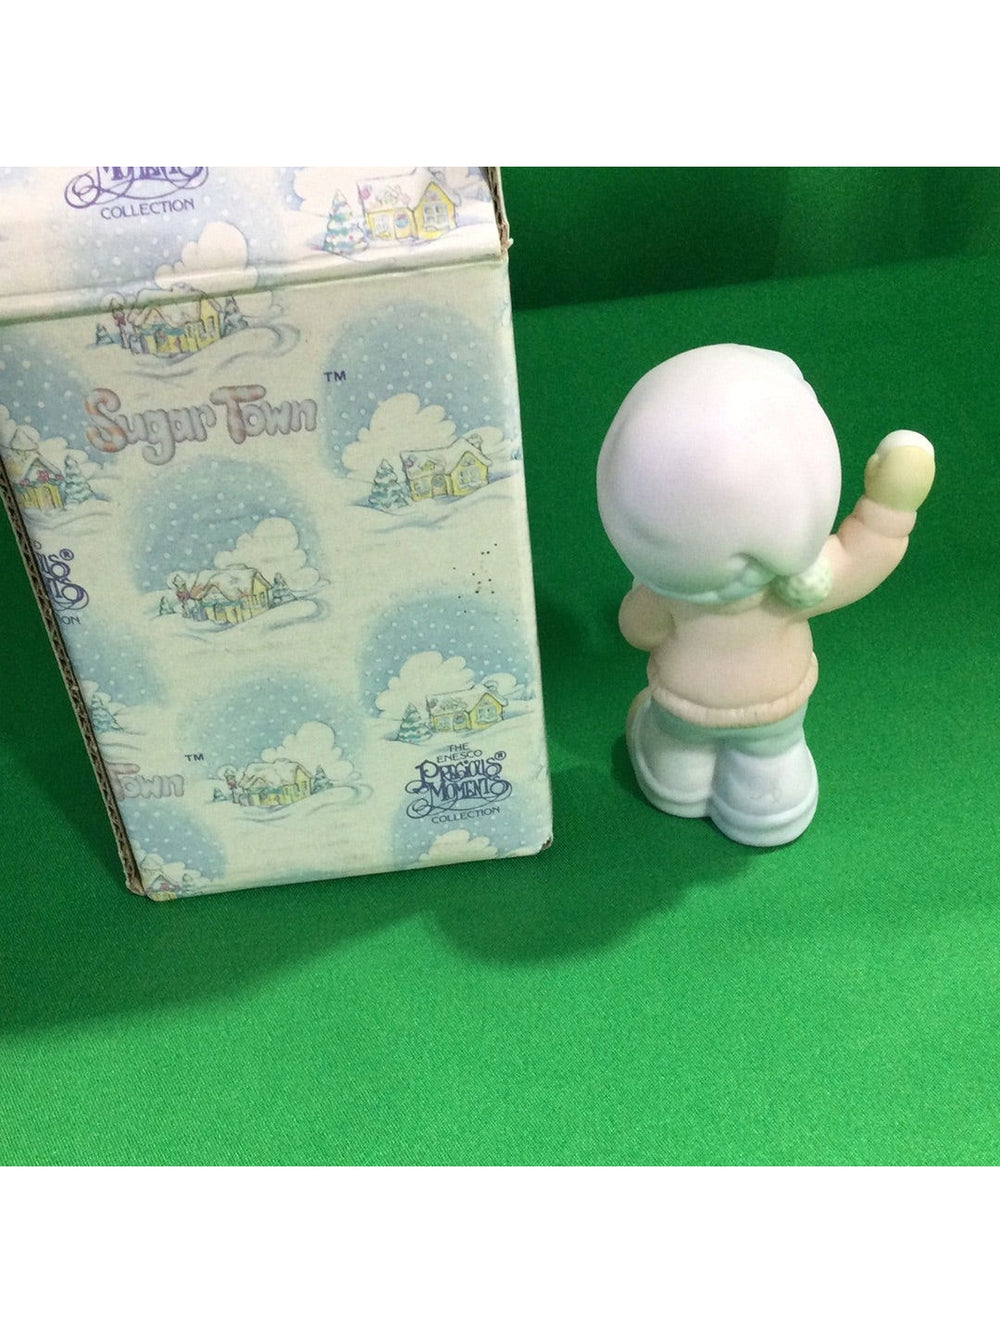 Precious Moments Sammy Boy with Snowballs Figurine In Box - The Kennedy Collective Thrift - 